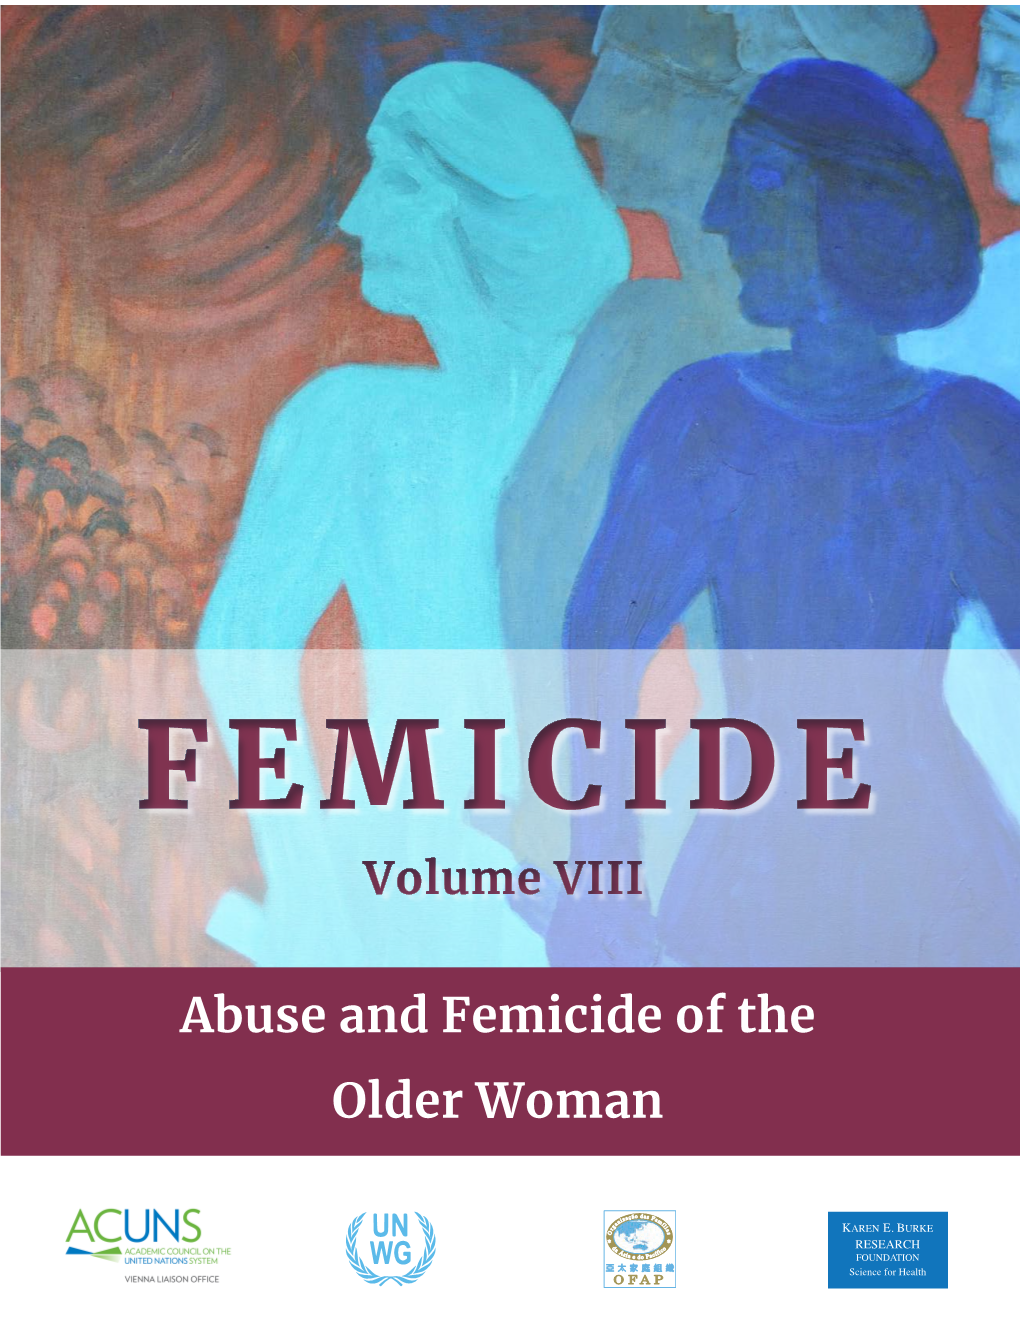 Abuse and Femicide of the Older Woman